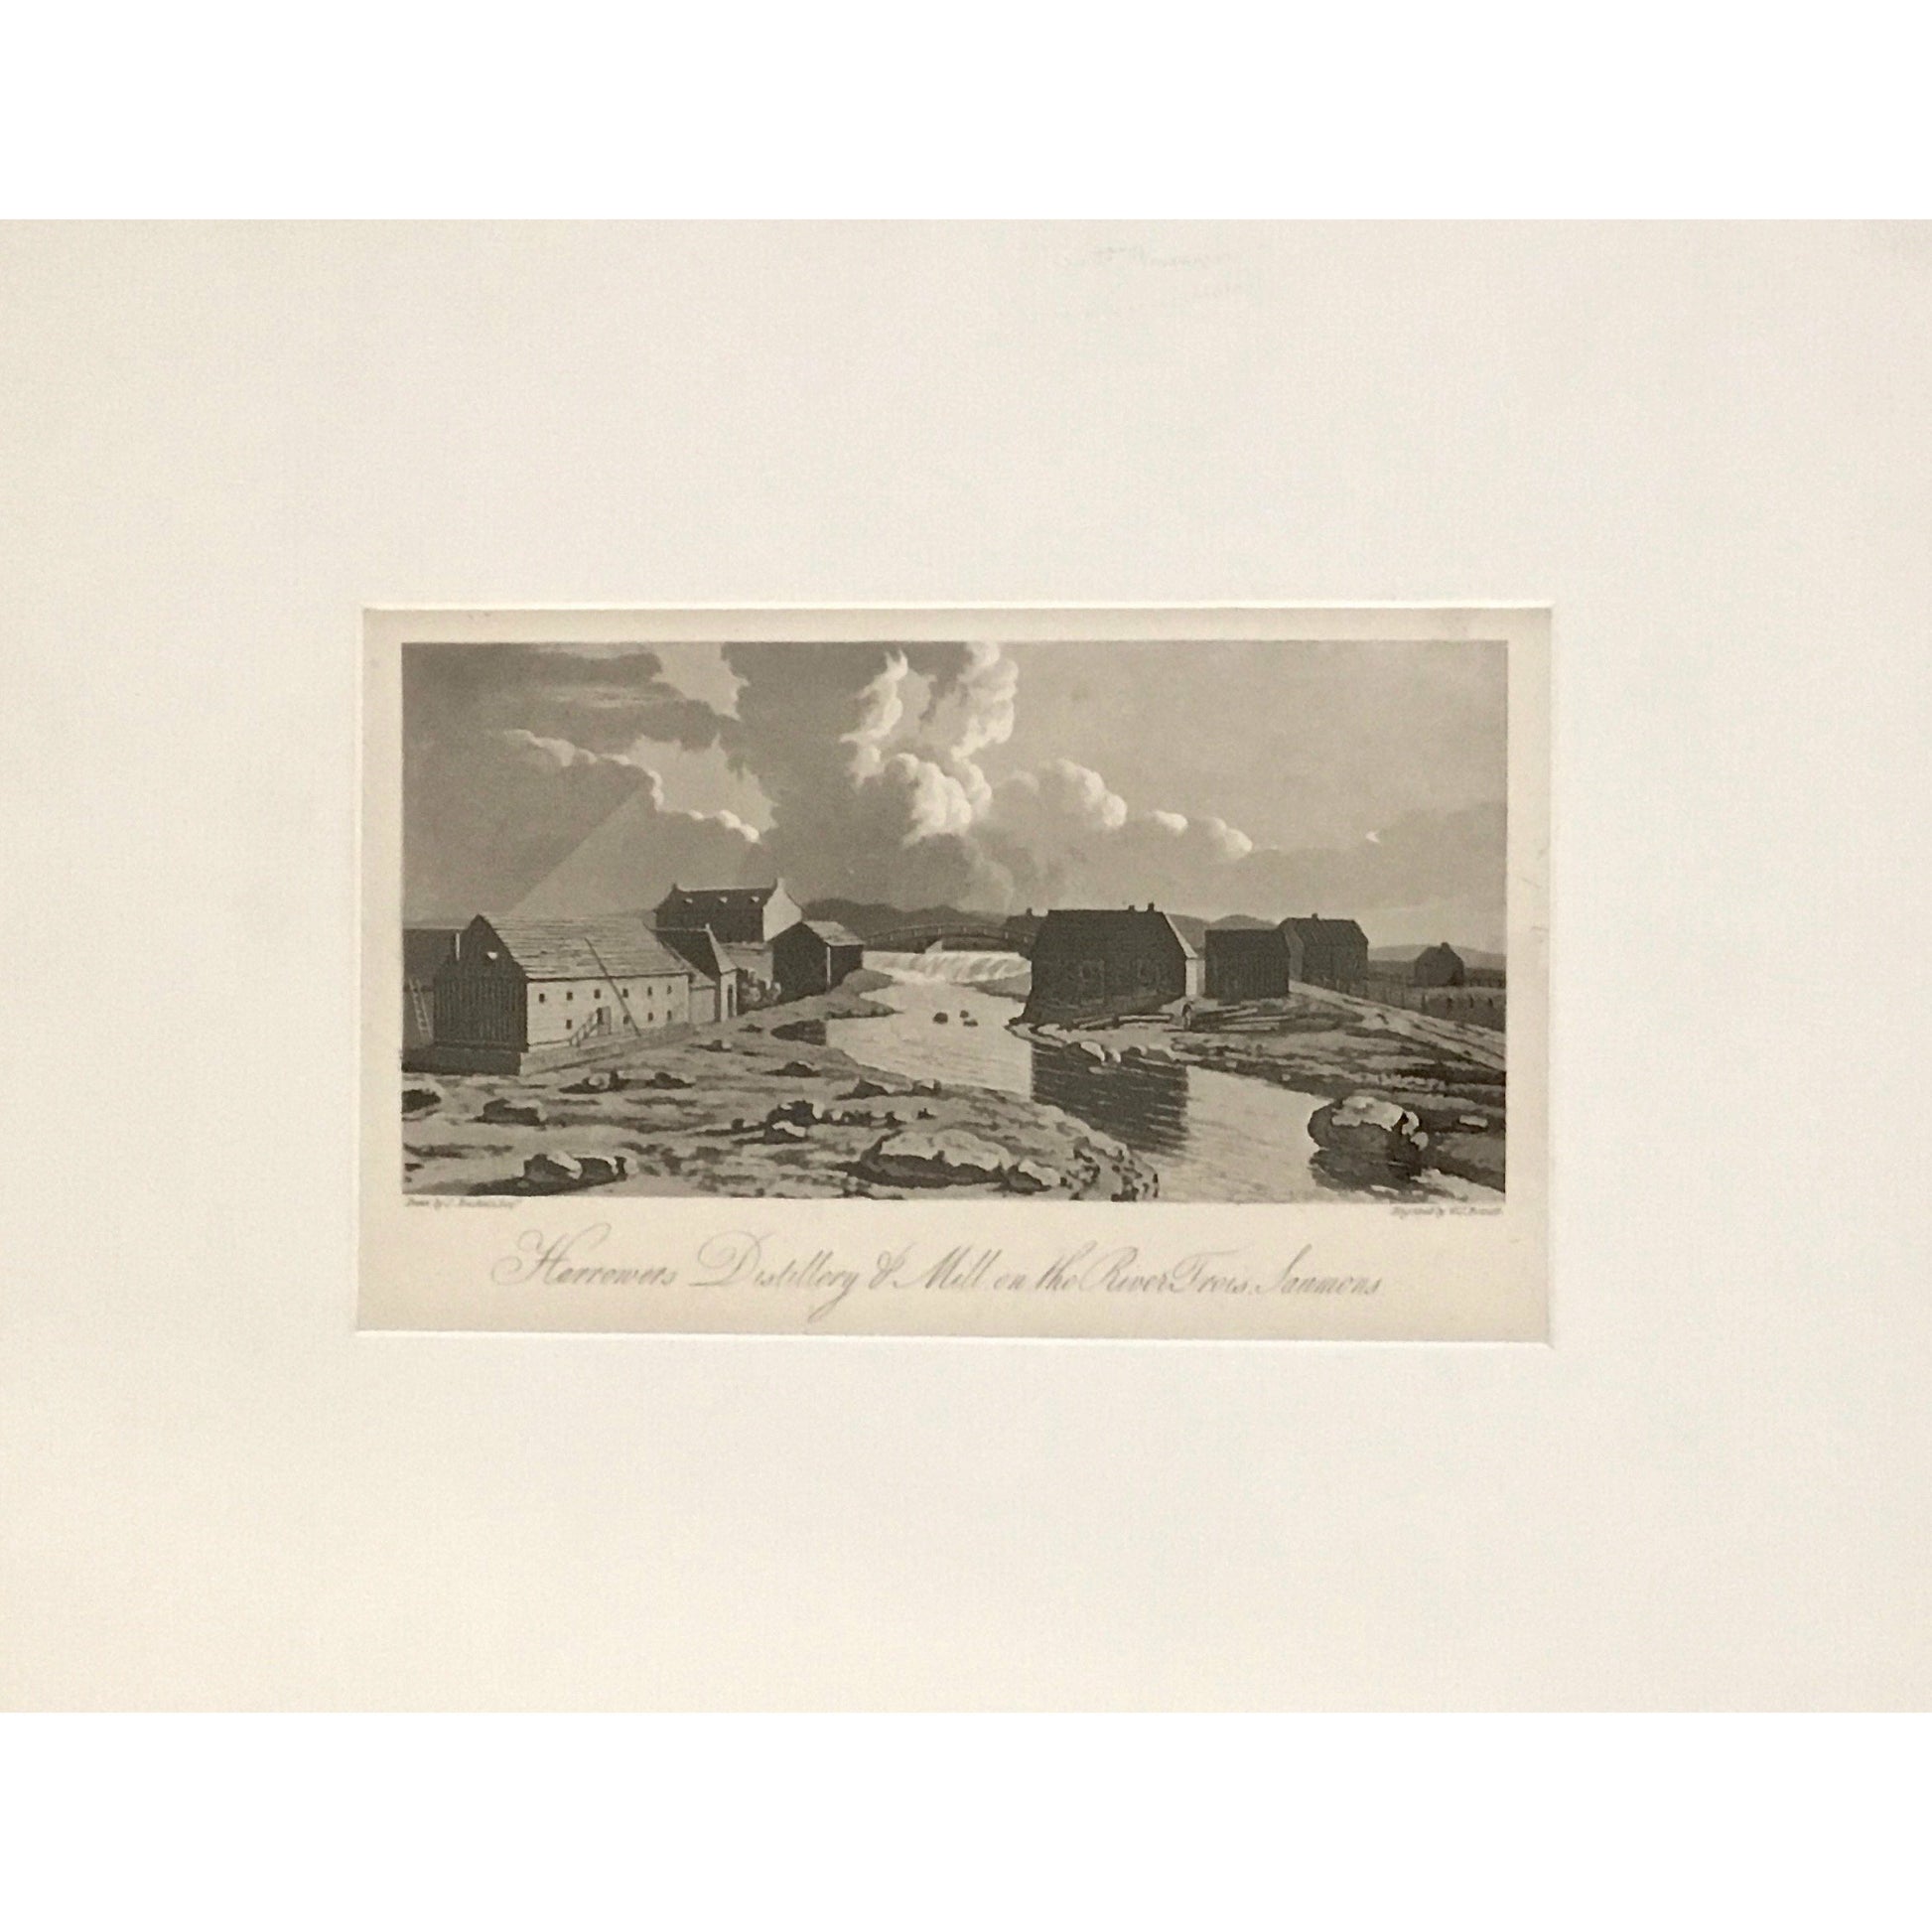 Harrowers Distillery, Harrowers, Distillery, Mill, River Trois Saumons, Riviere Trois Saumon, River, three salmon, building, bridge, town, A Topographical Description of the Province of Lower Canada, Lower Canada, Joseph Bouchette, Bouchette, 1815, W. Faden, Faden, W. J. Bennett, Bennett, Charing Cross, London, steel engraving, black and white, matted, Antique, Vintage, Art, Decor, Design, Home Decor, Wall art, Canadian, Historical, Rare Prints, Old Books, Old Prints, Rare Books,